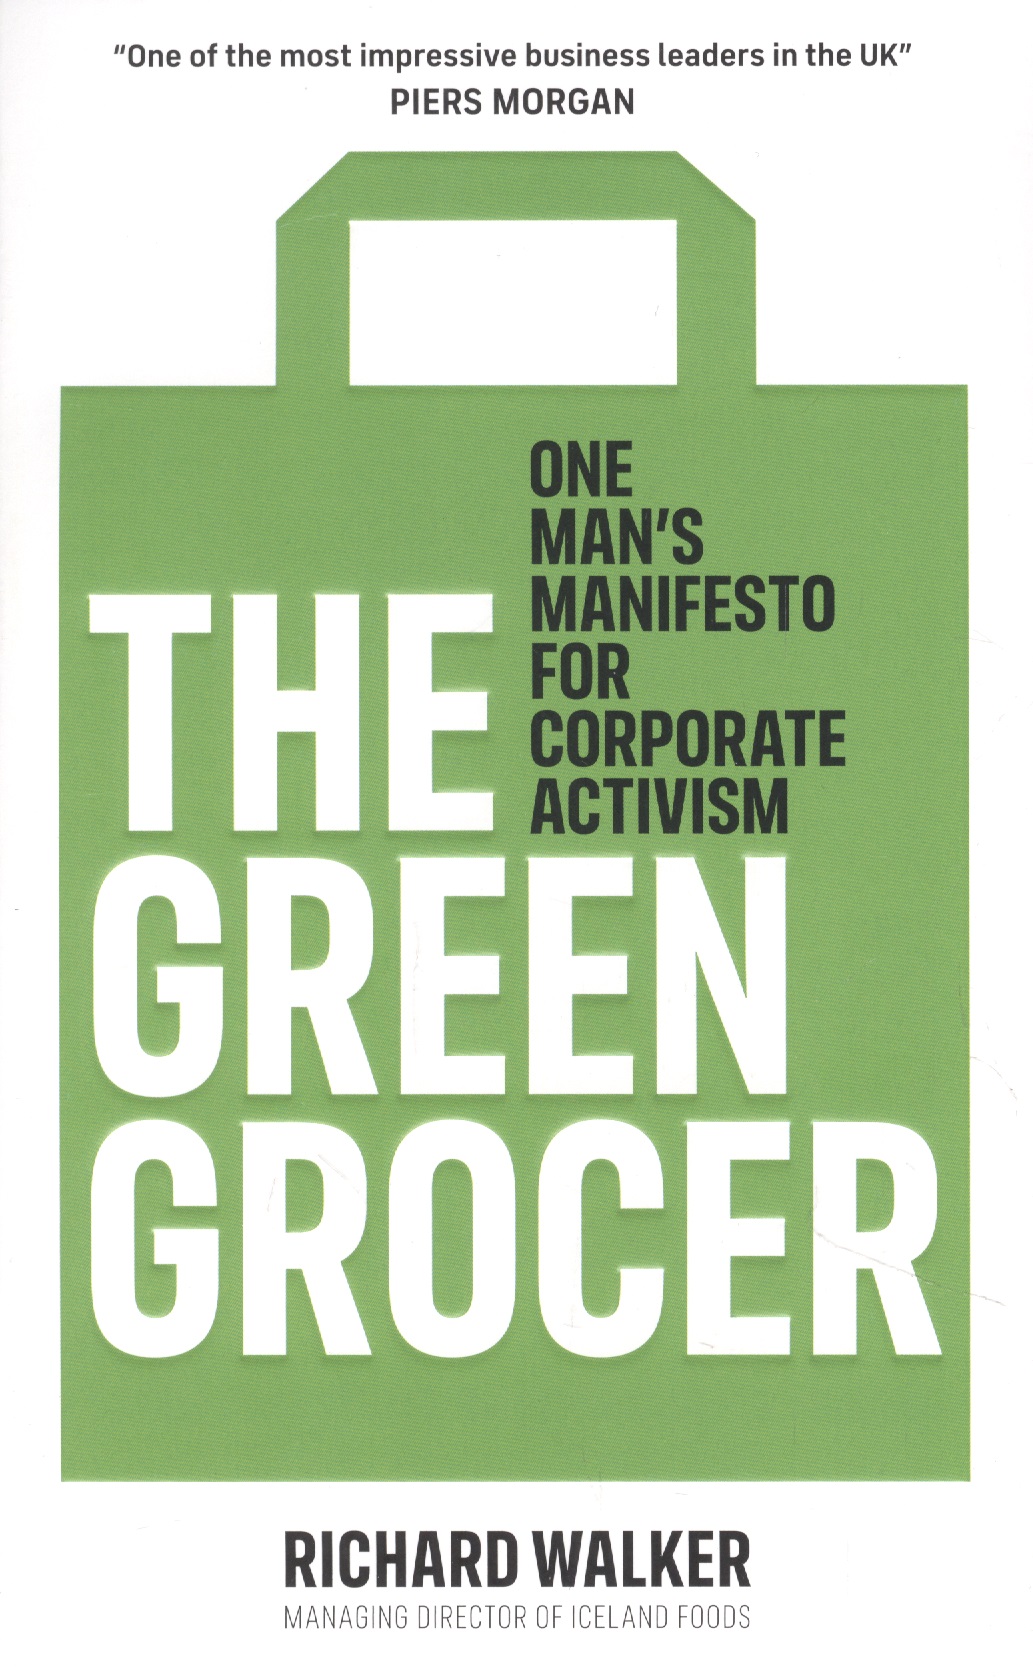 The Green Grocer. One Mans Manifesto for Corporate Activism 6 books set learn to start a business from scratch start a business open a business make money guide publish recommended books